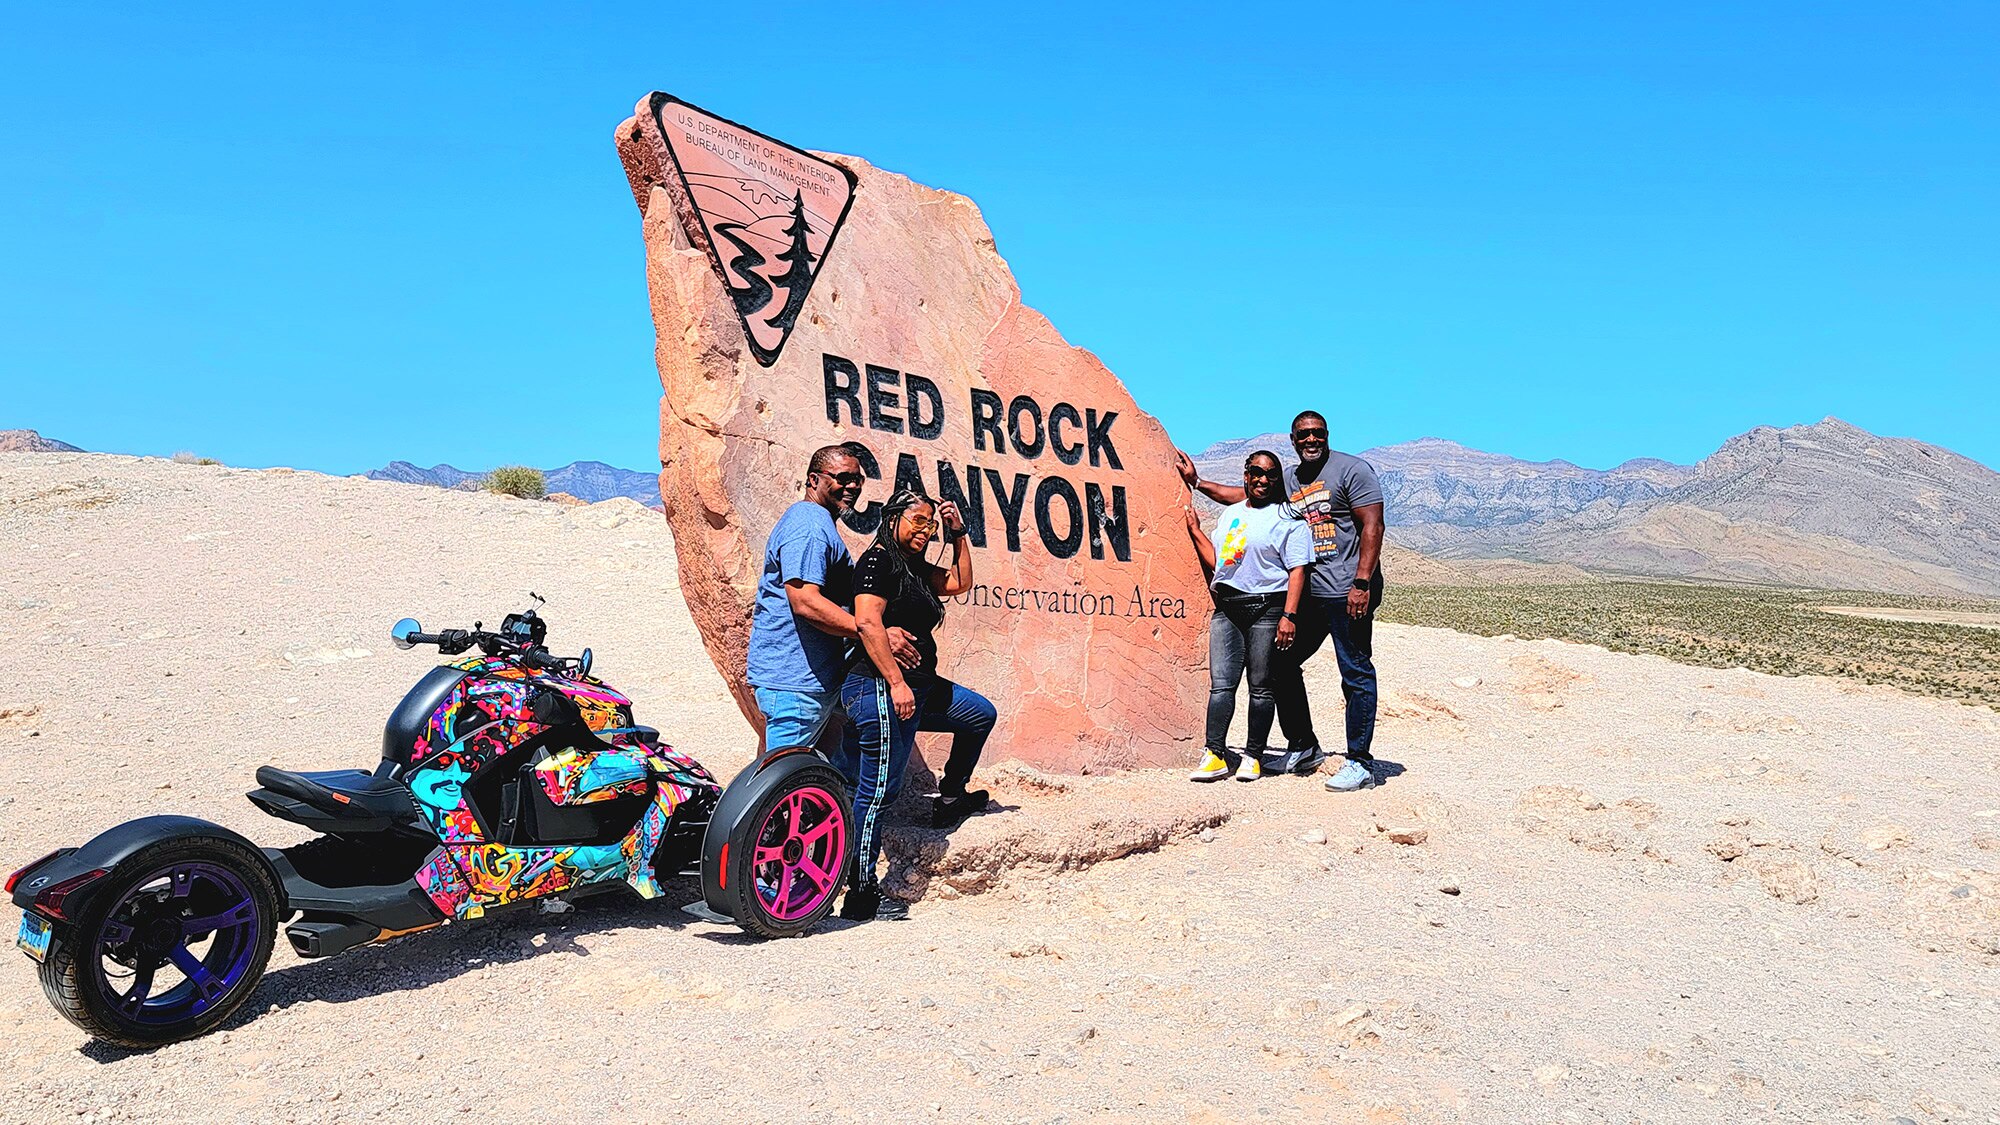 Two couples in front of the Red Rock Canyon sign